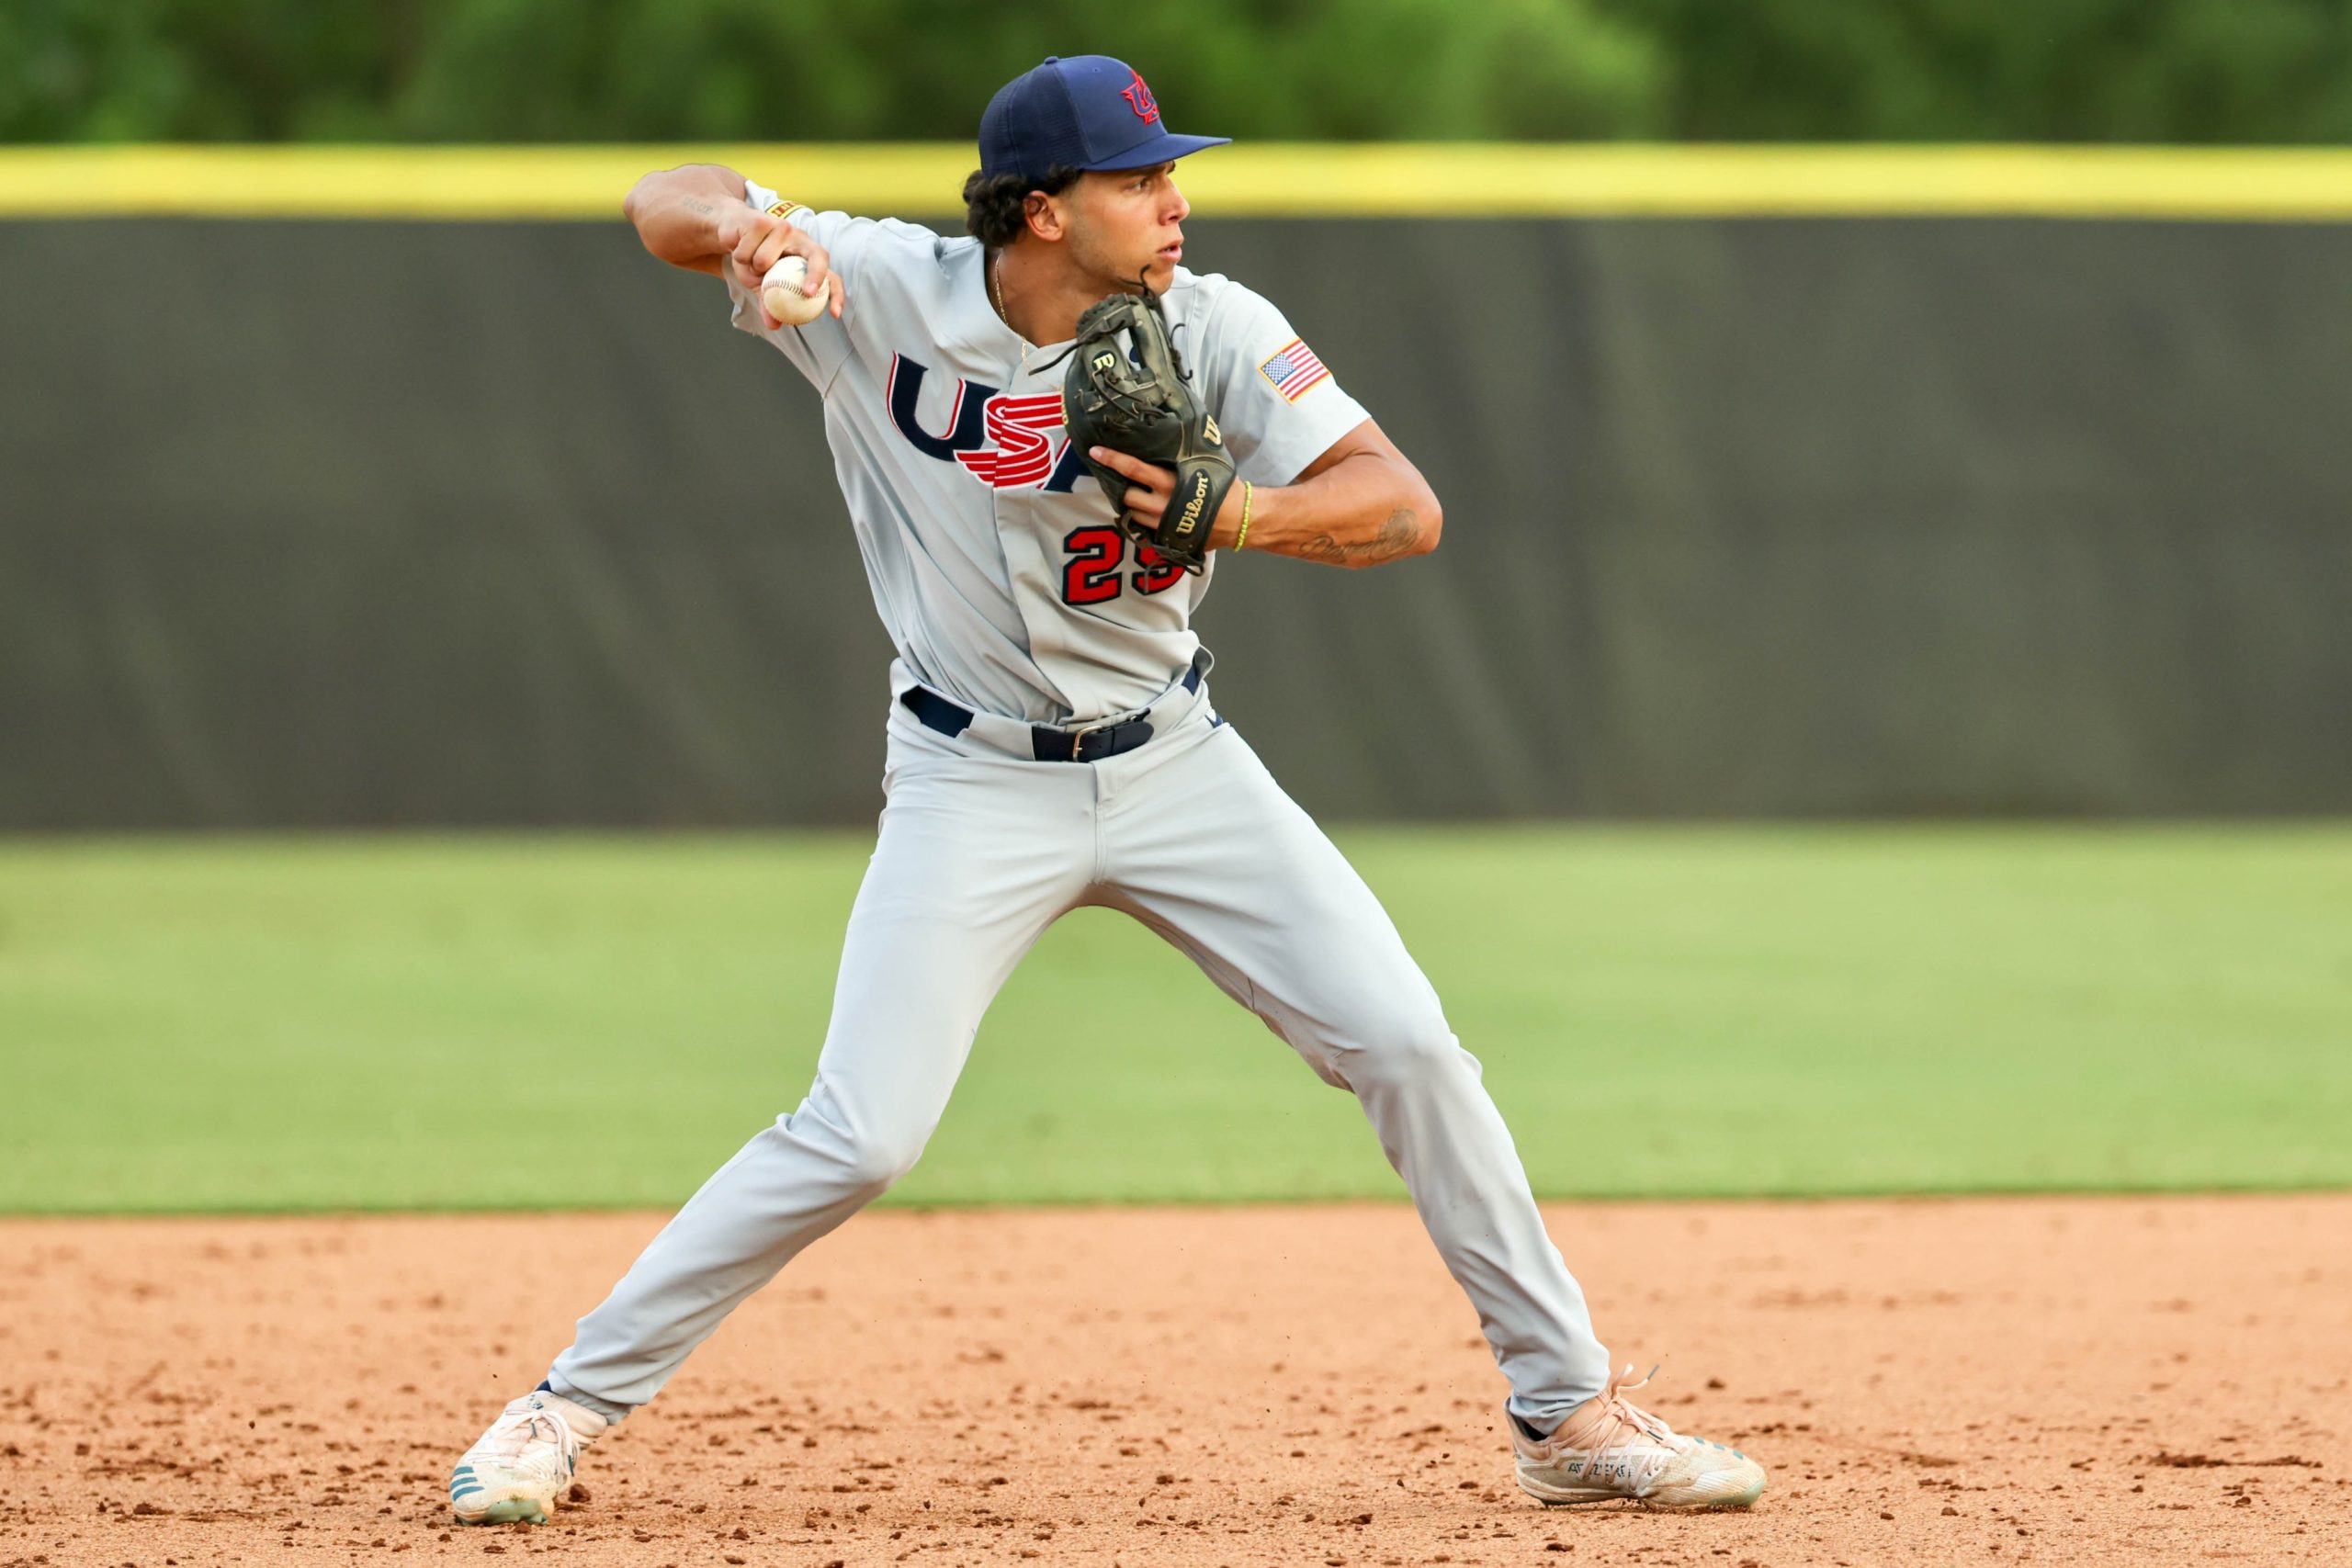 Lamar University catcher Ryan Snell drafted by Washington Nationals